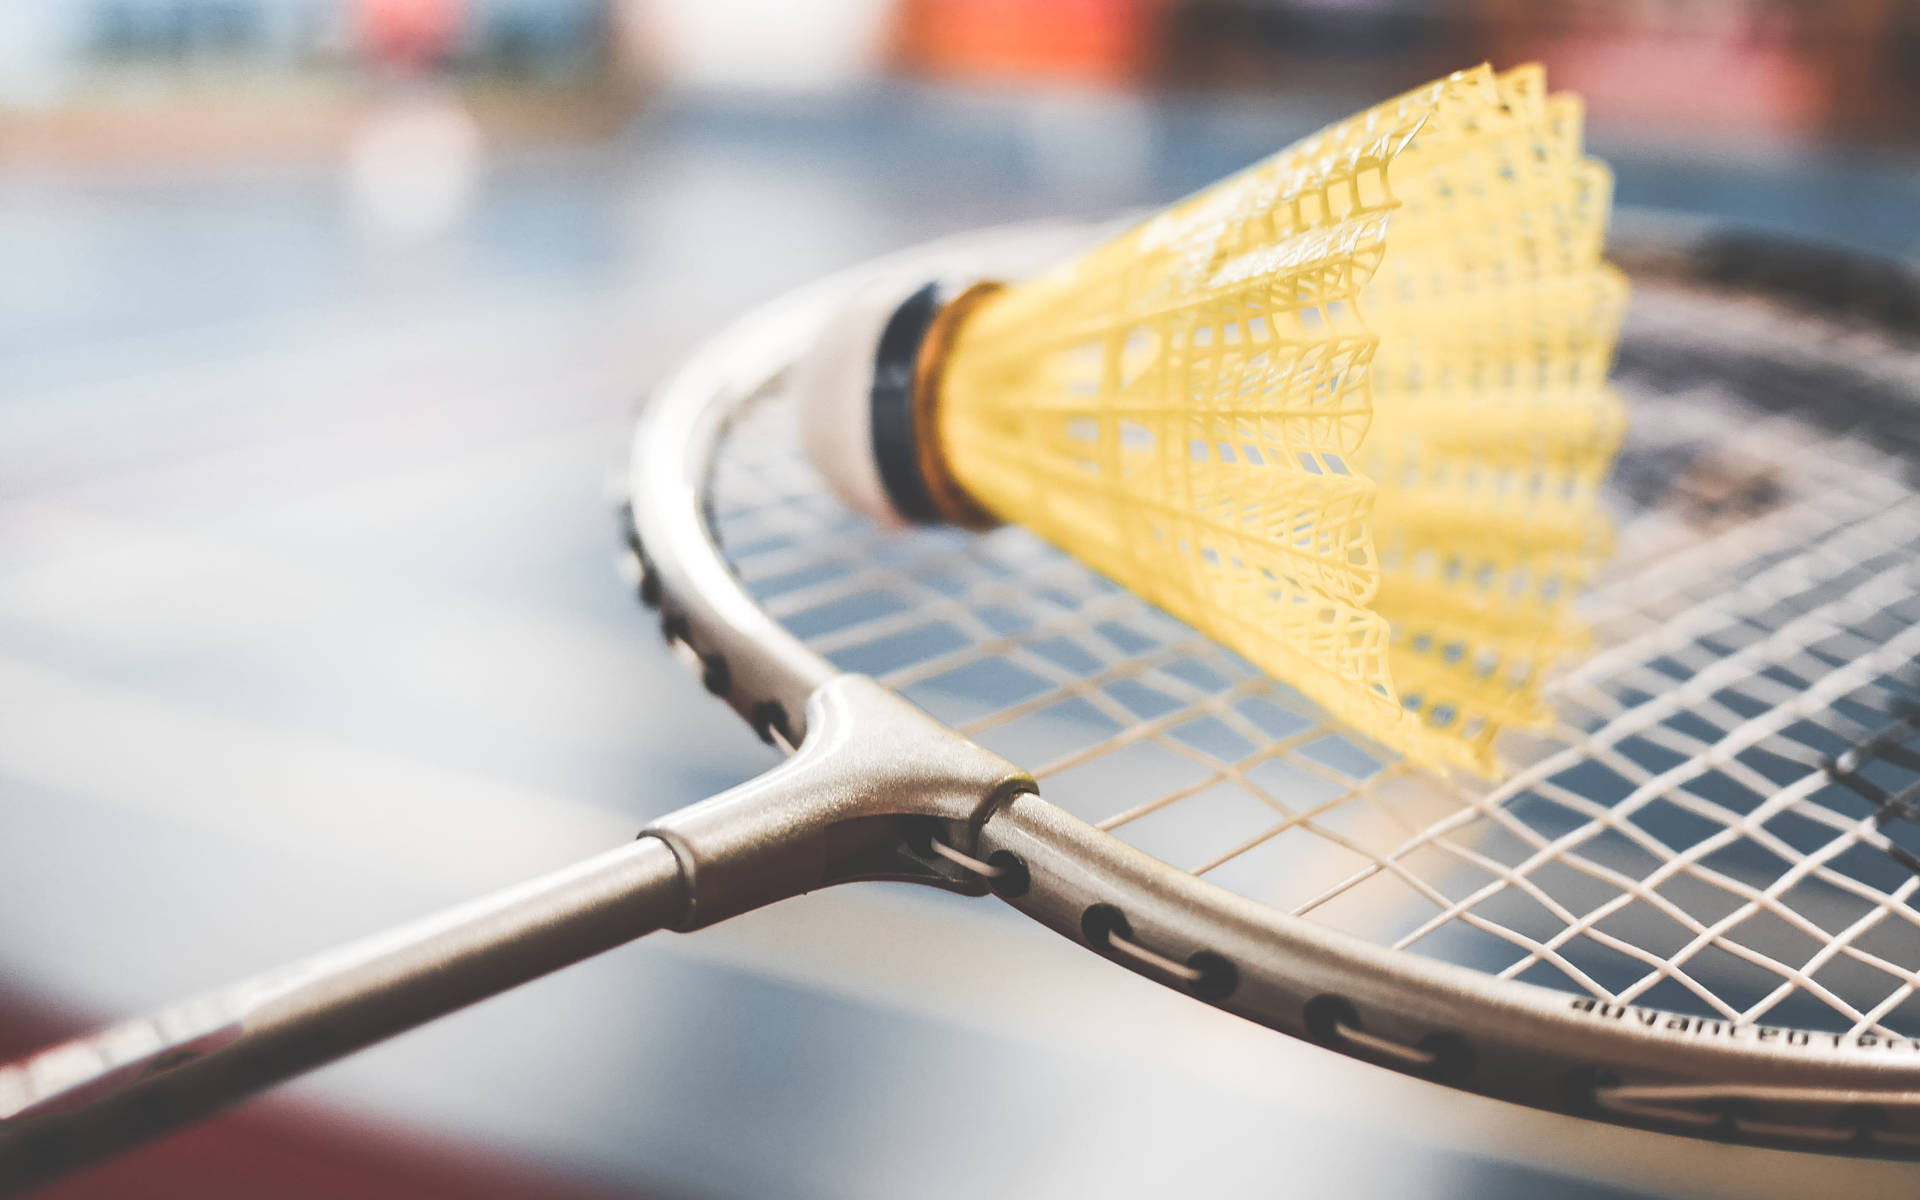 Badminton 2880X1800 Wallpaper and Background Image